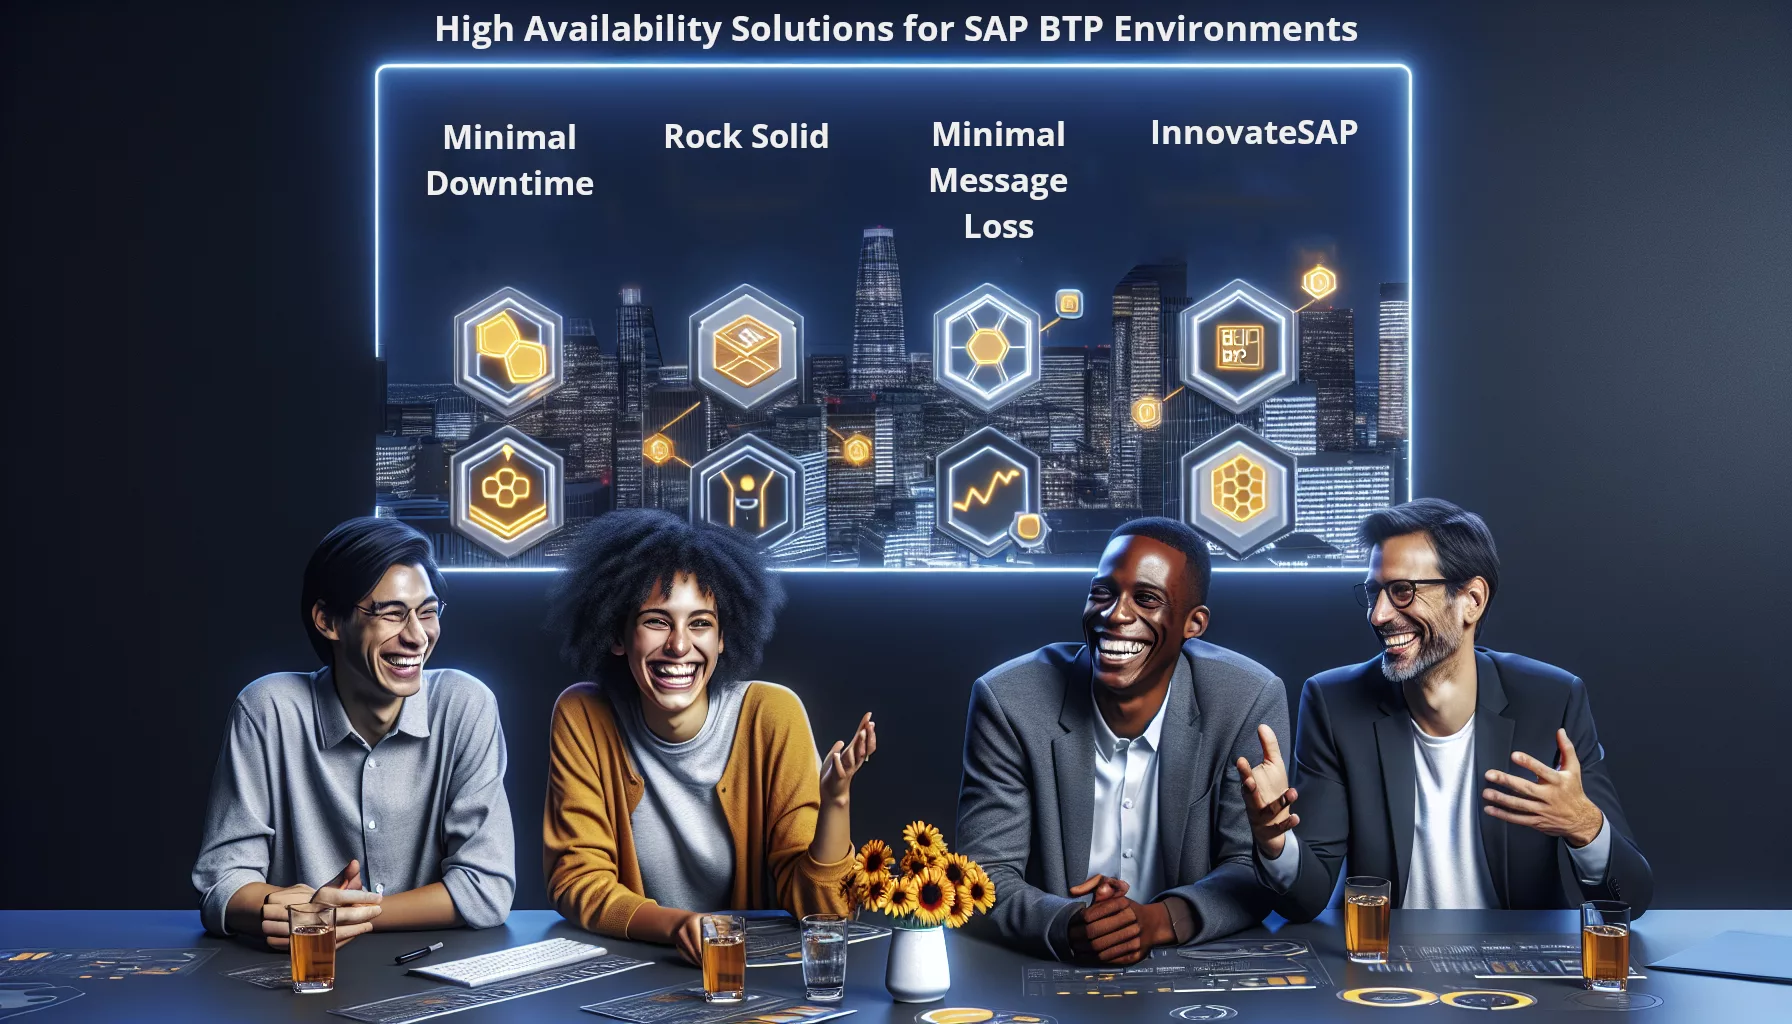 HO2 Sets New Standards for High Availability in SAP Integration Suite